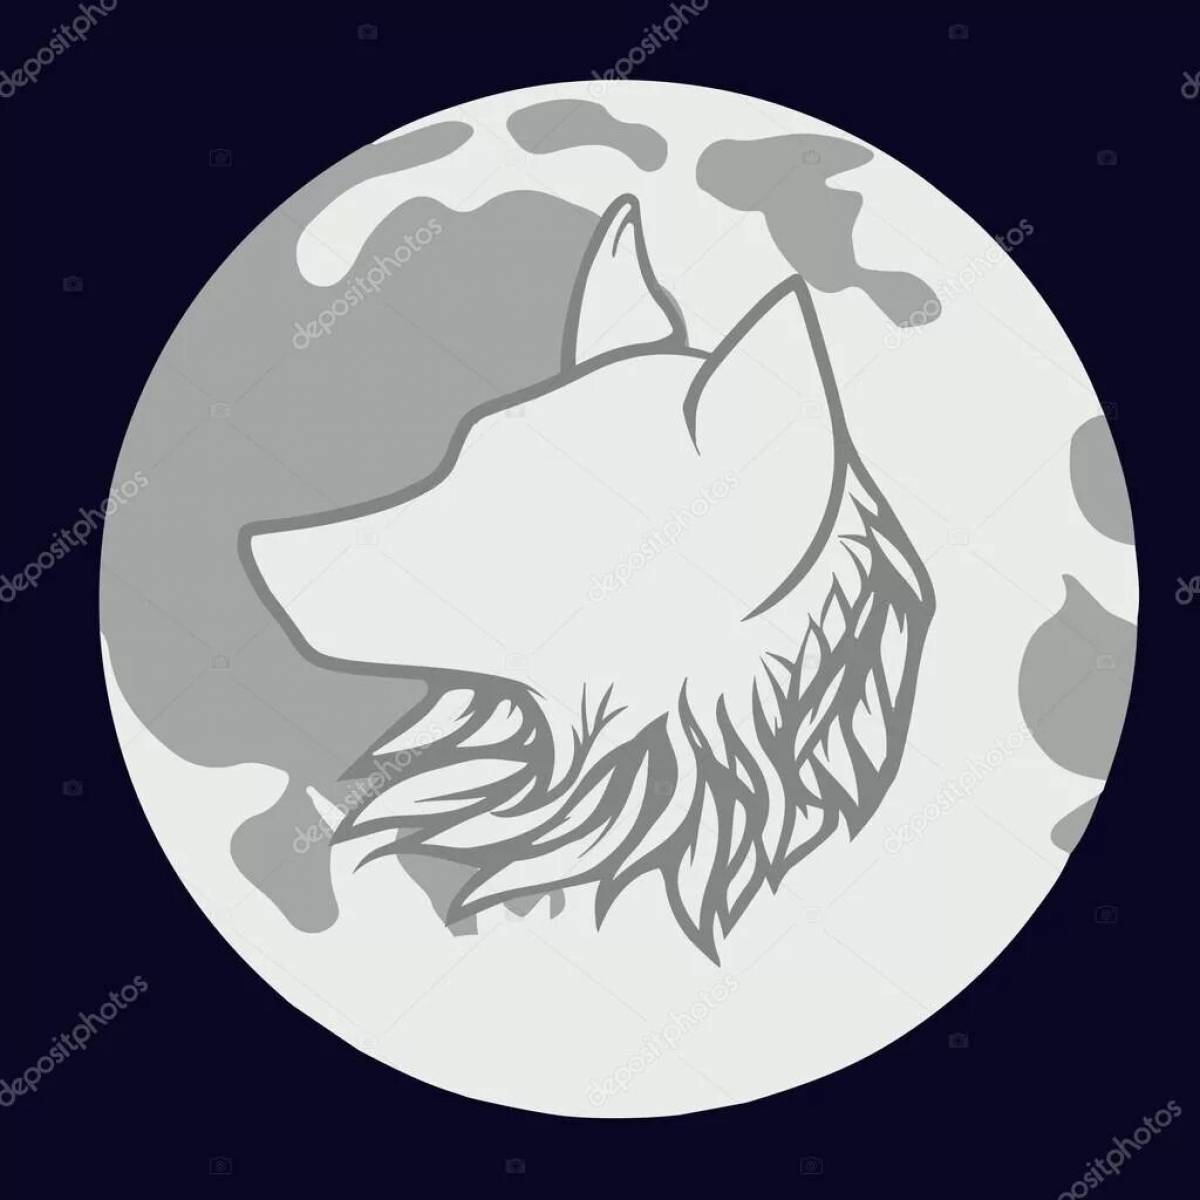 Wolf howling at the moon #6